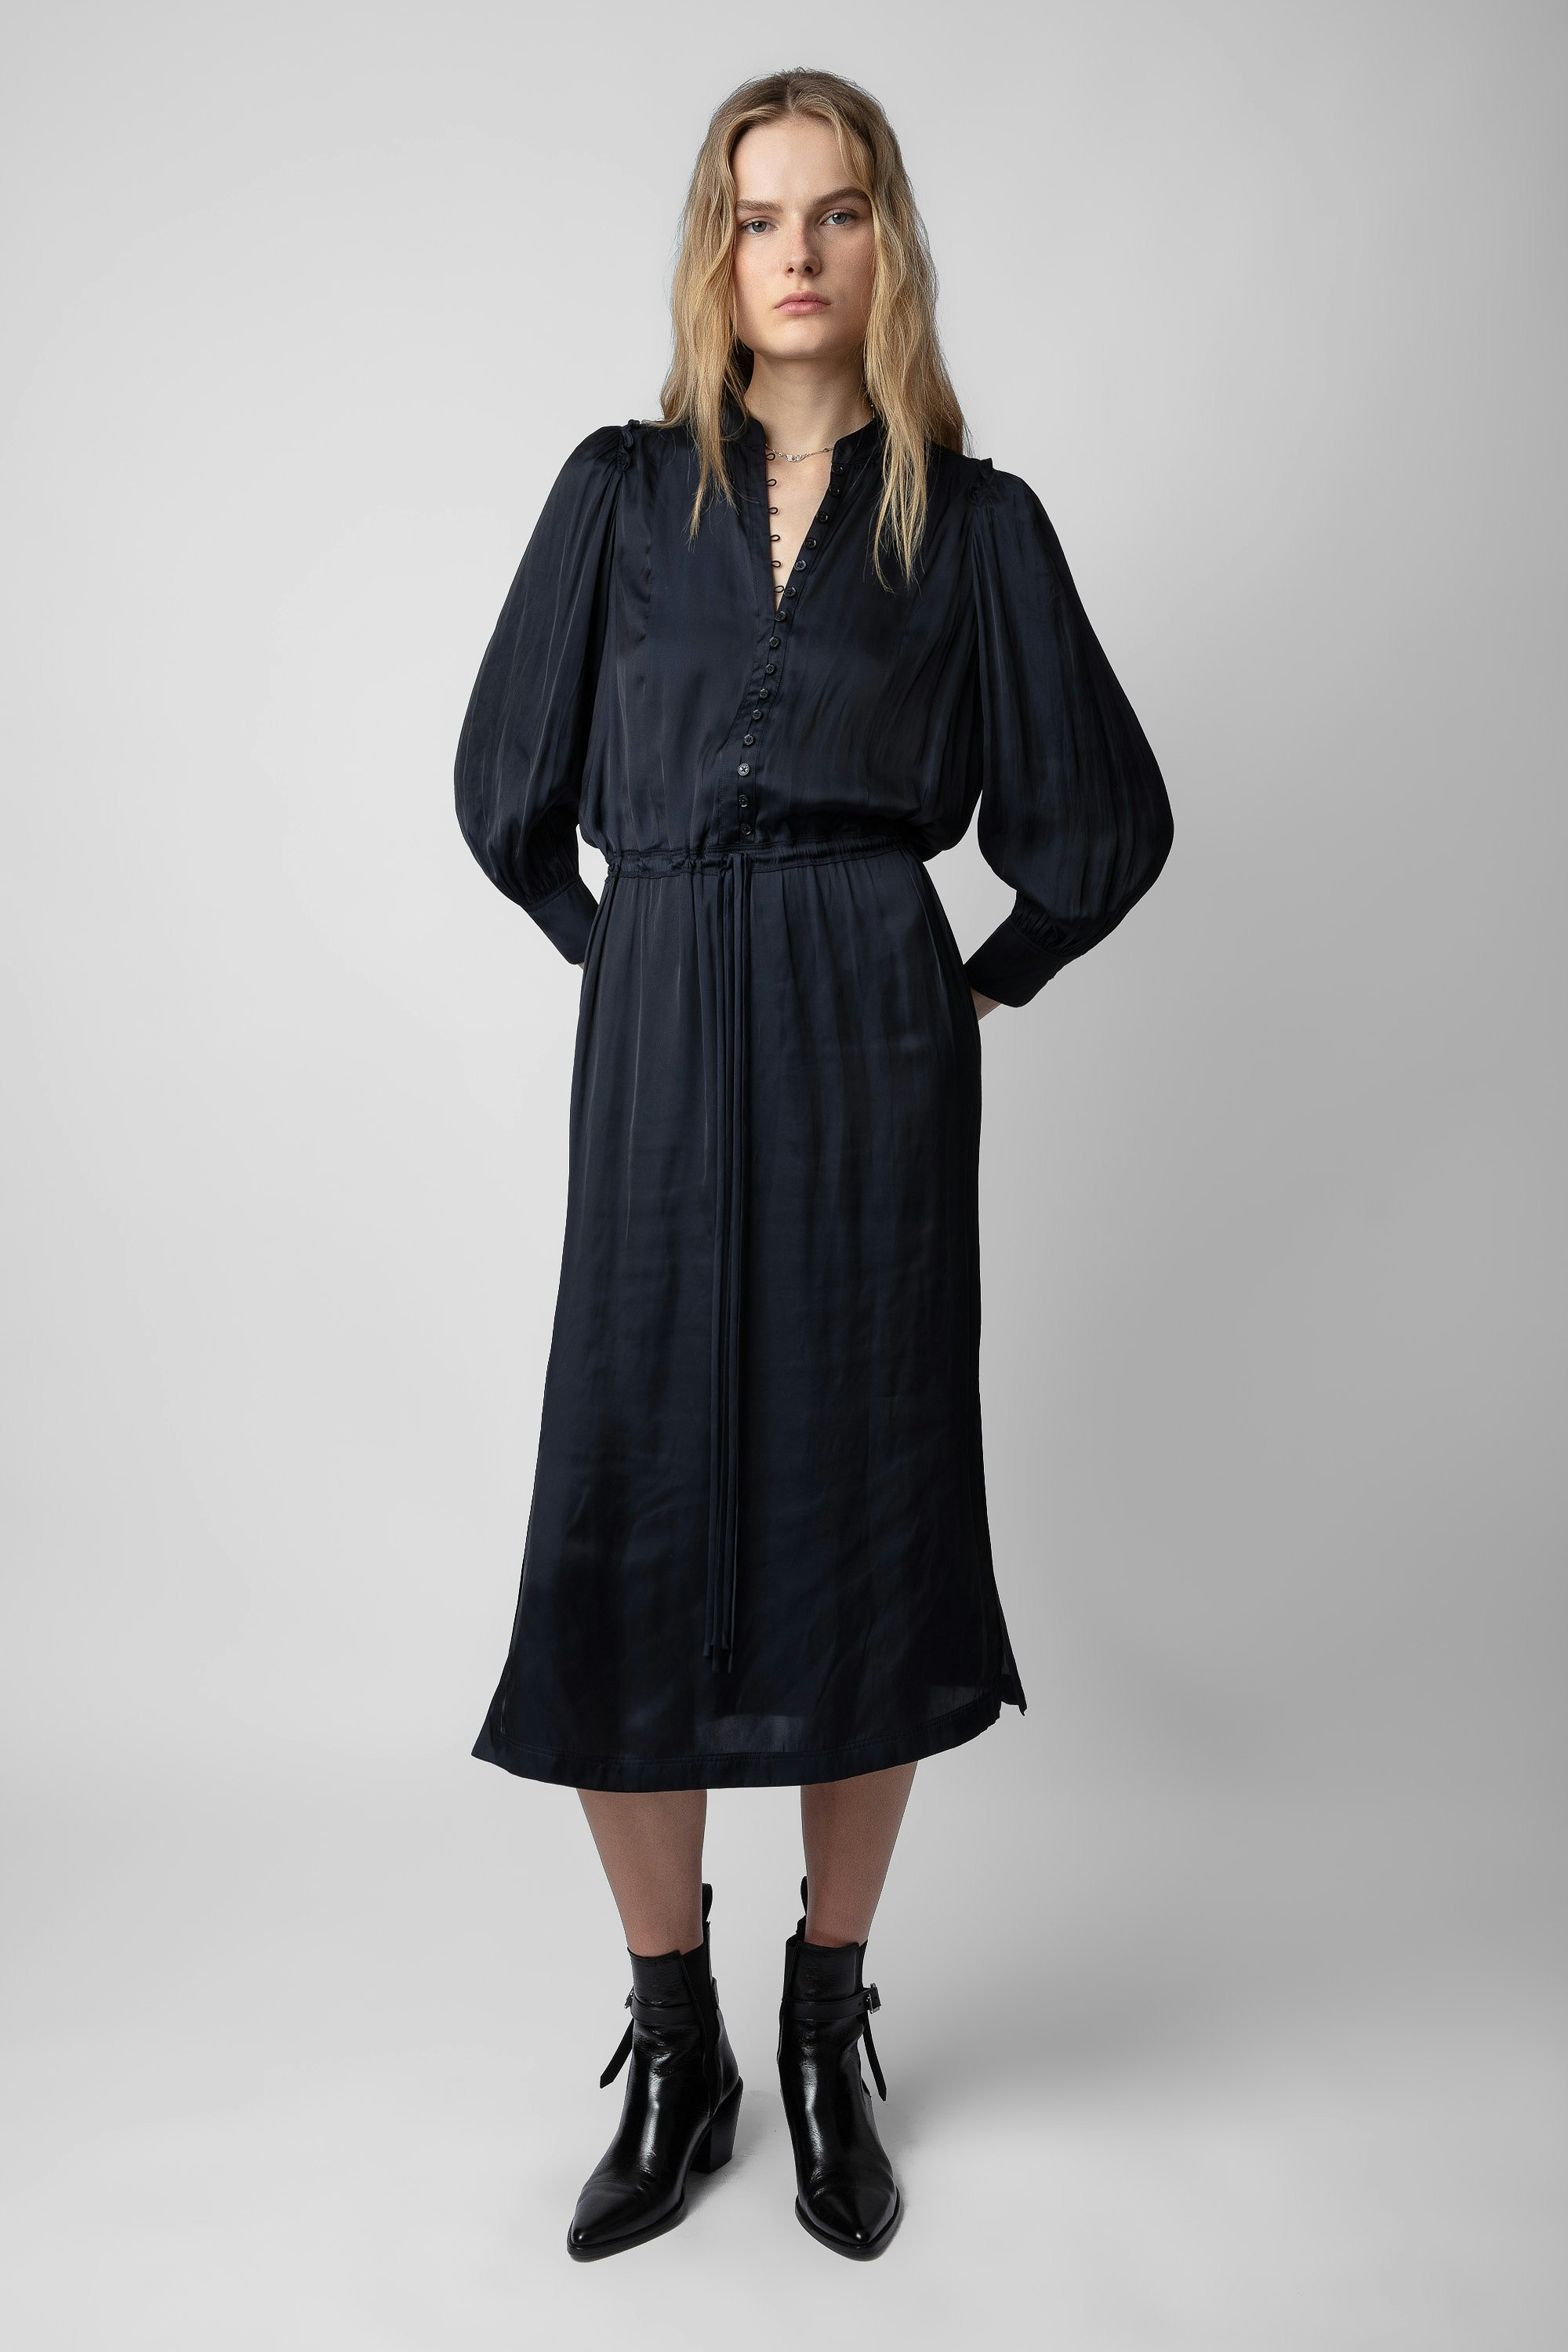 Relinda Satin Dress - Women’s long navy blue satin dress, tied at the waist and embellished with gathers.